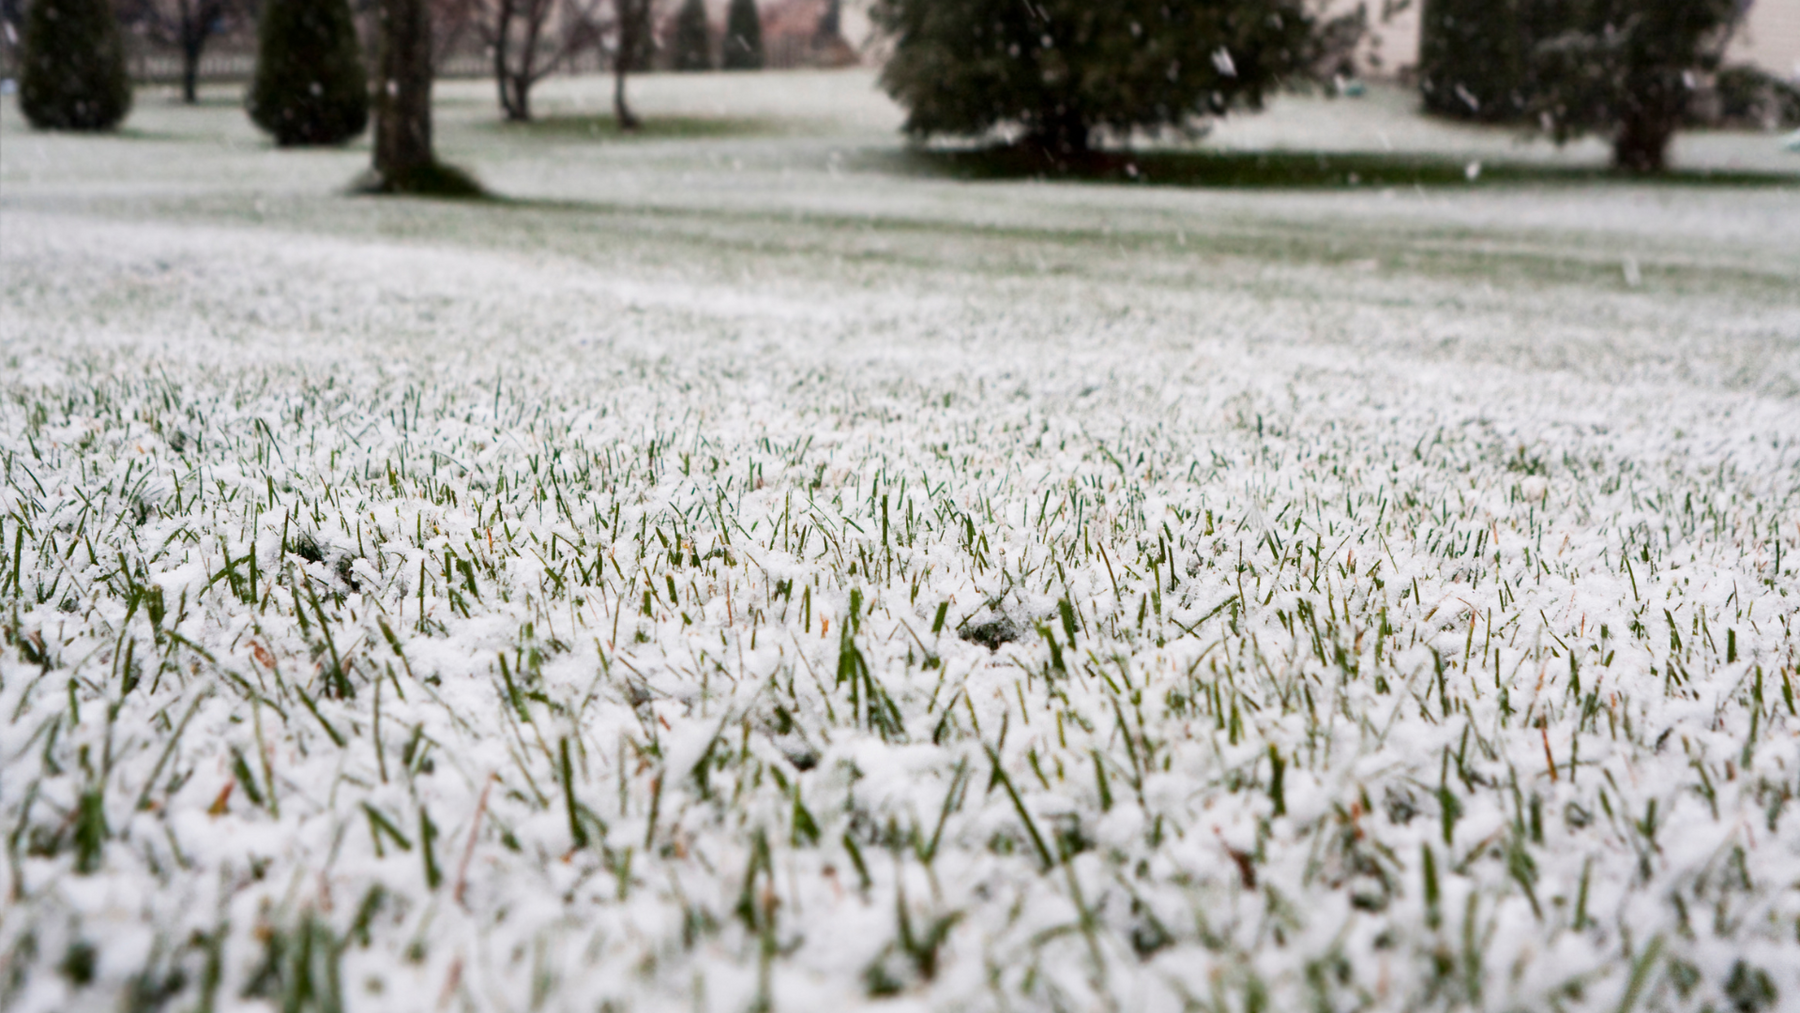 Be Ahead of the Game - Start Winterizing Your Sprinkler System Now!